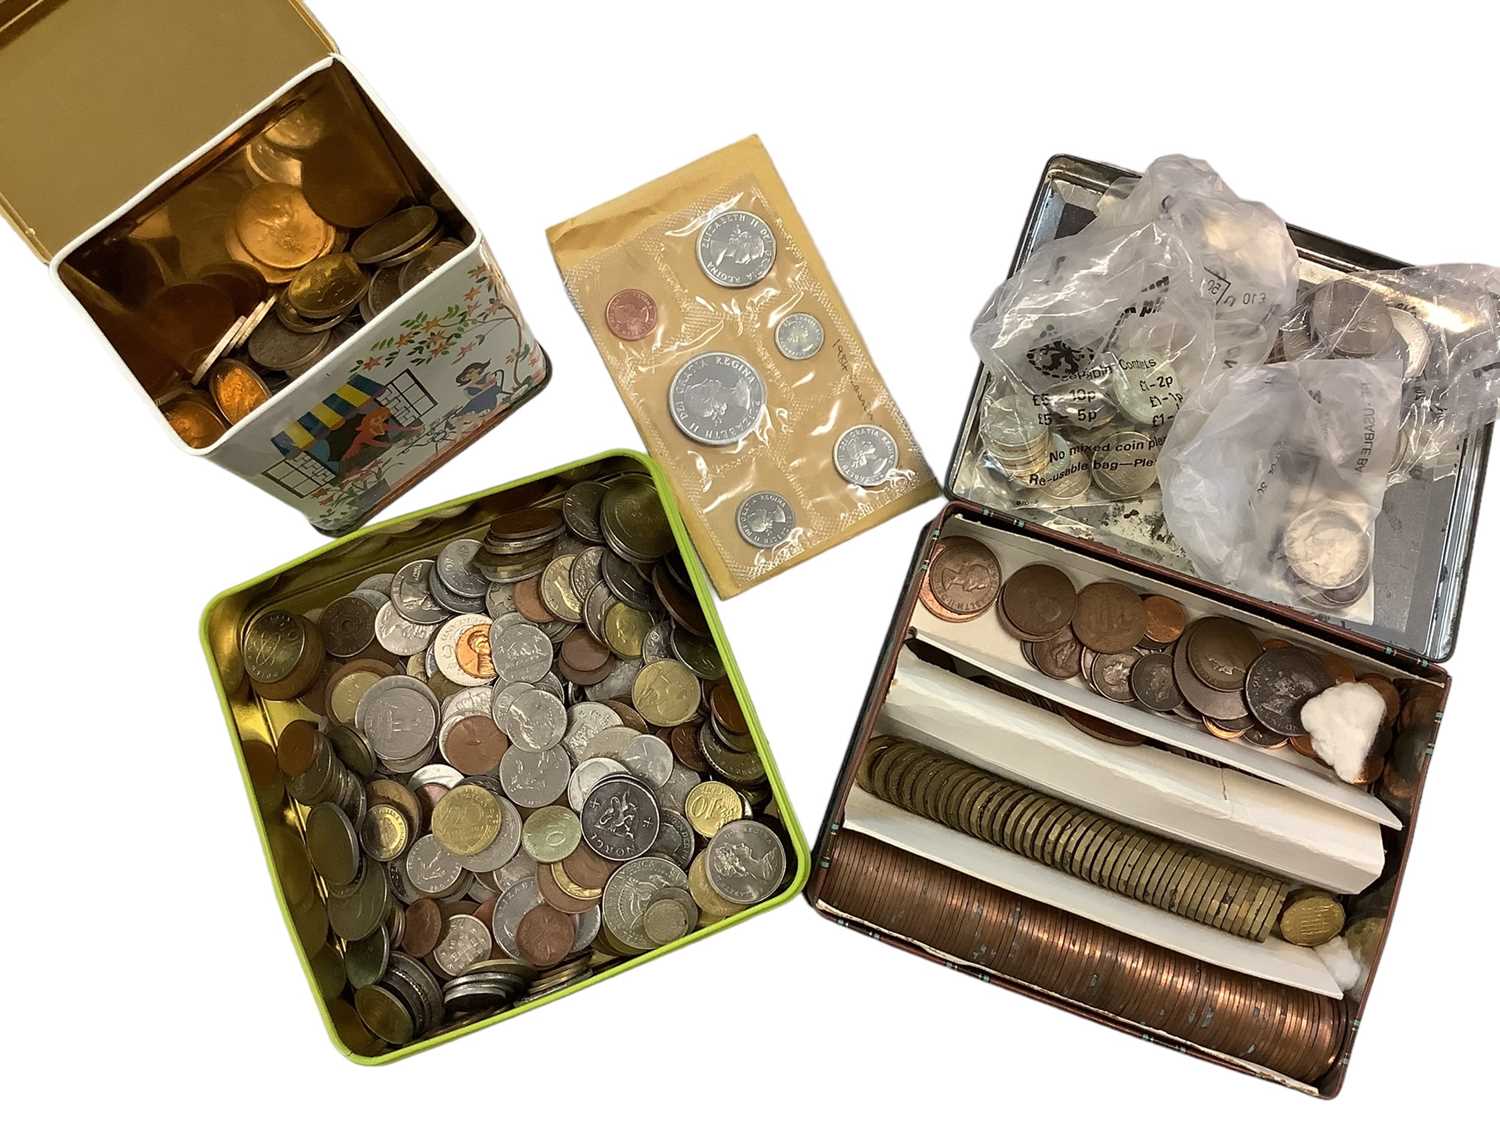 Lot 514 - World - Mixed coinage to include G.B. cupro-nickel Crowns, Canada six coin set 1984 to include silver Dollar & Half Dollar & others to include a small quantity of silver (Qty)